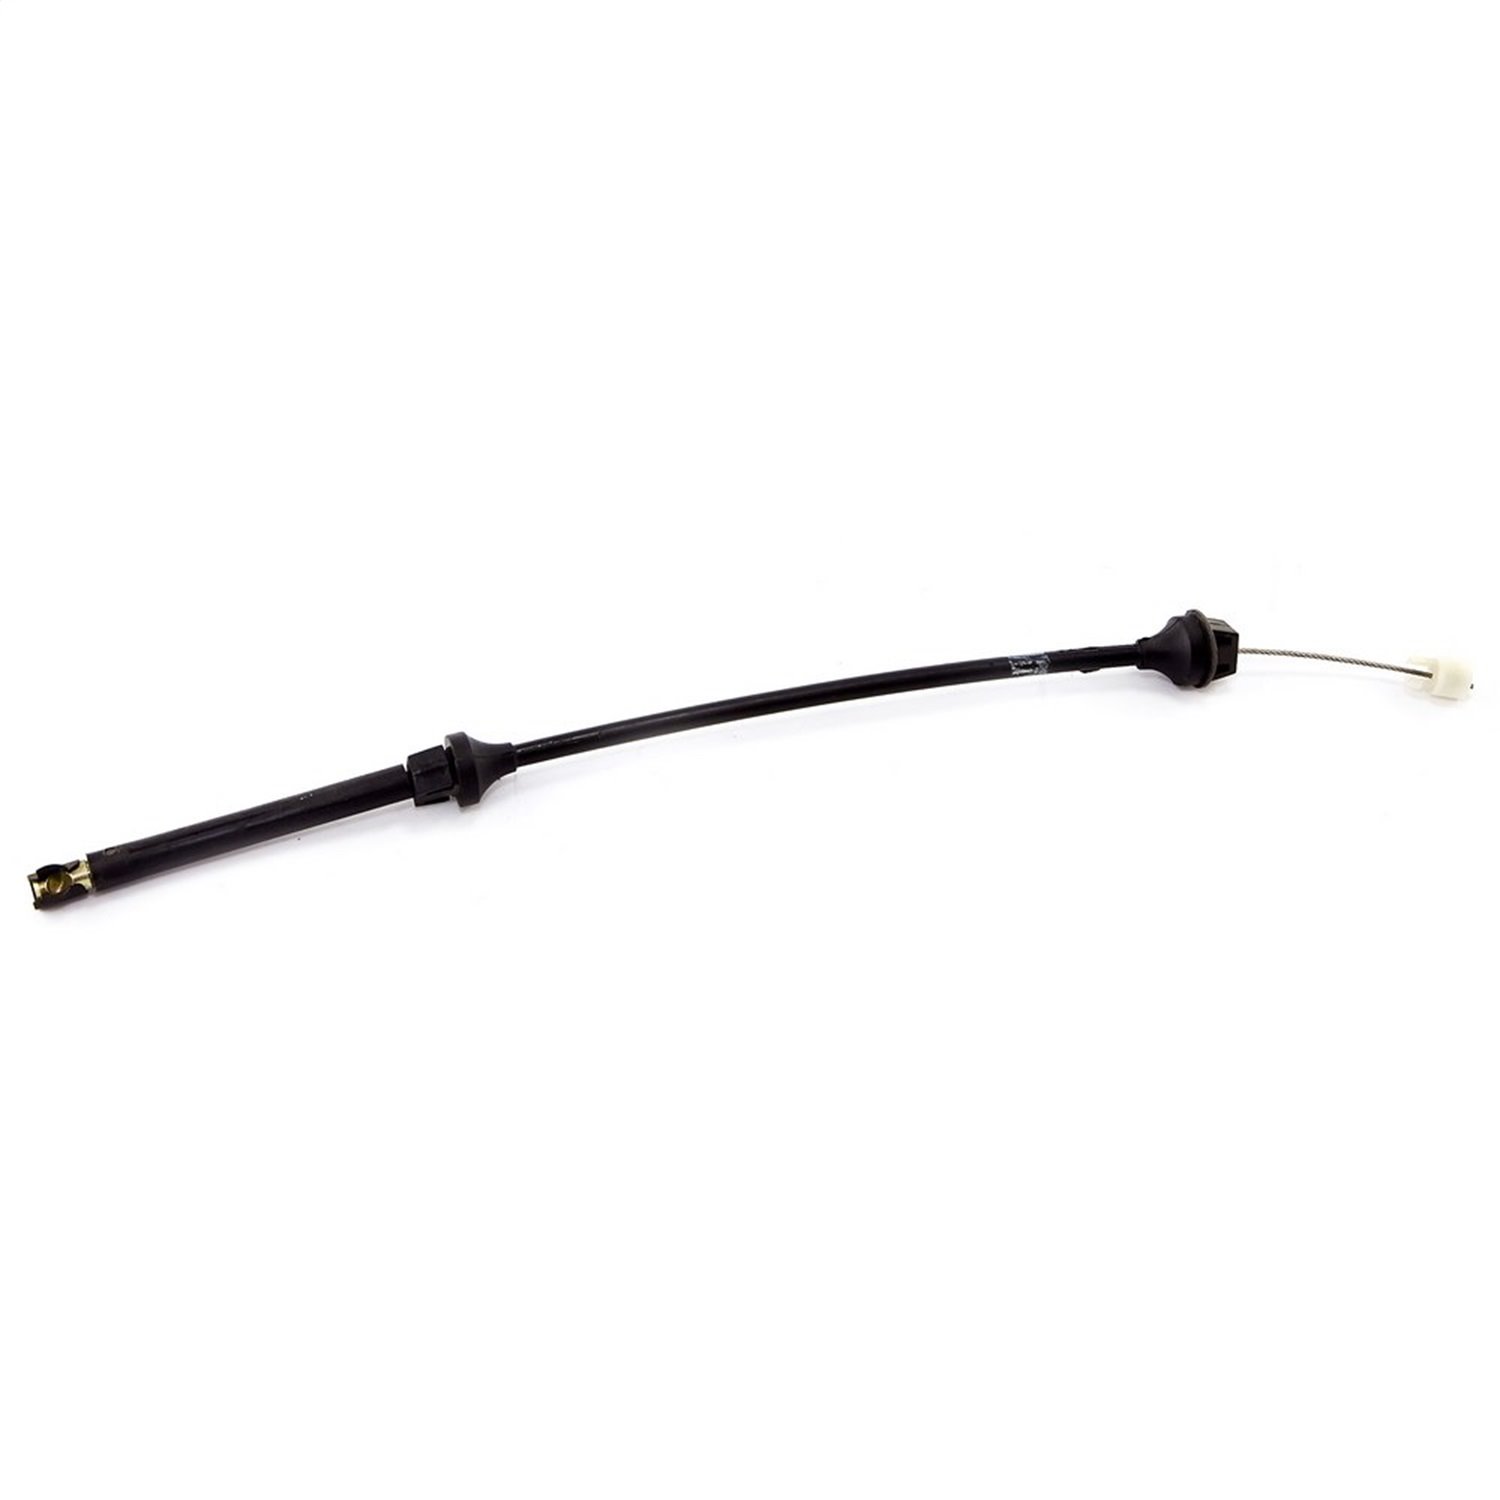 Accelerator Cable 1987-1991 Grand Wagoneer 5.9L and 6.1L